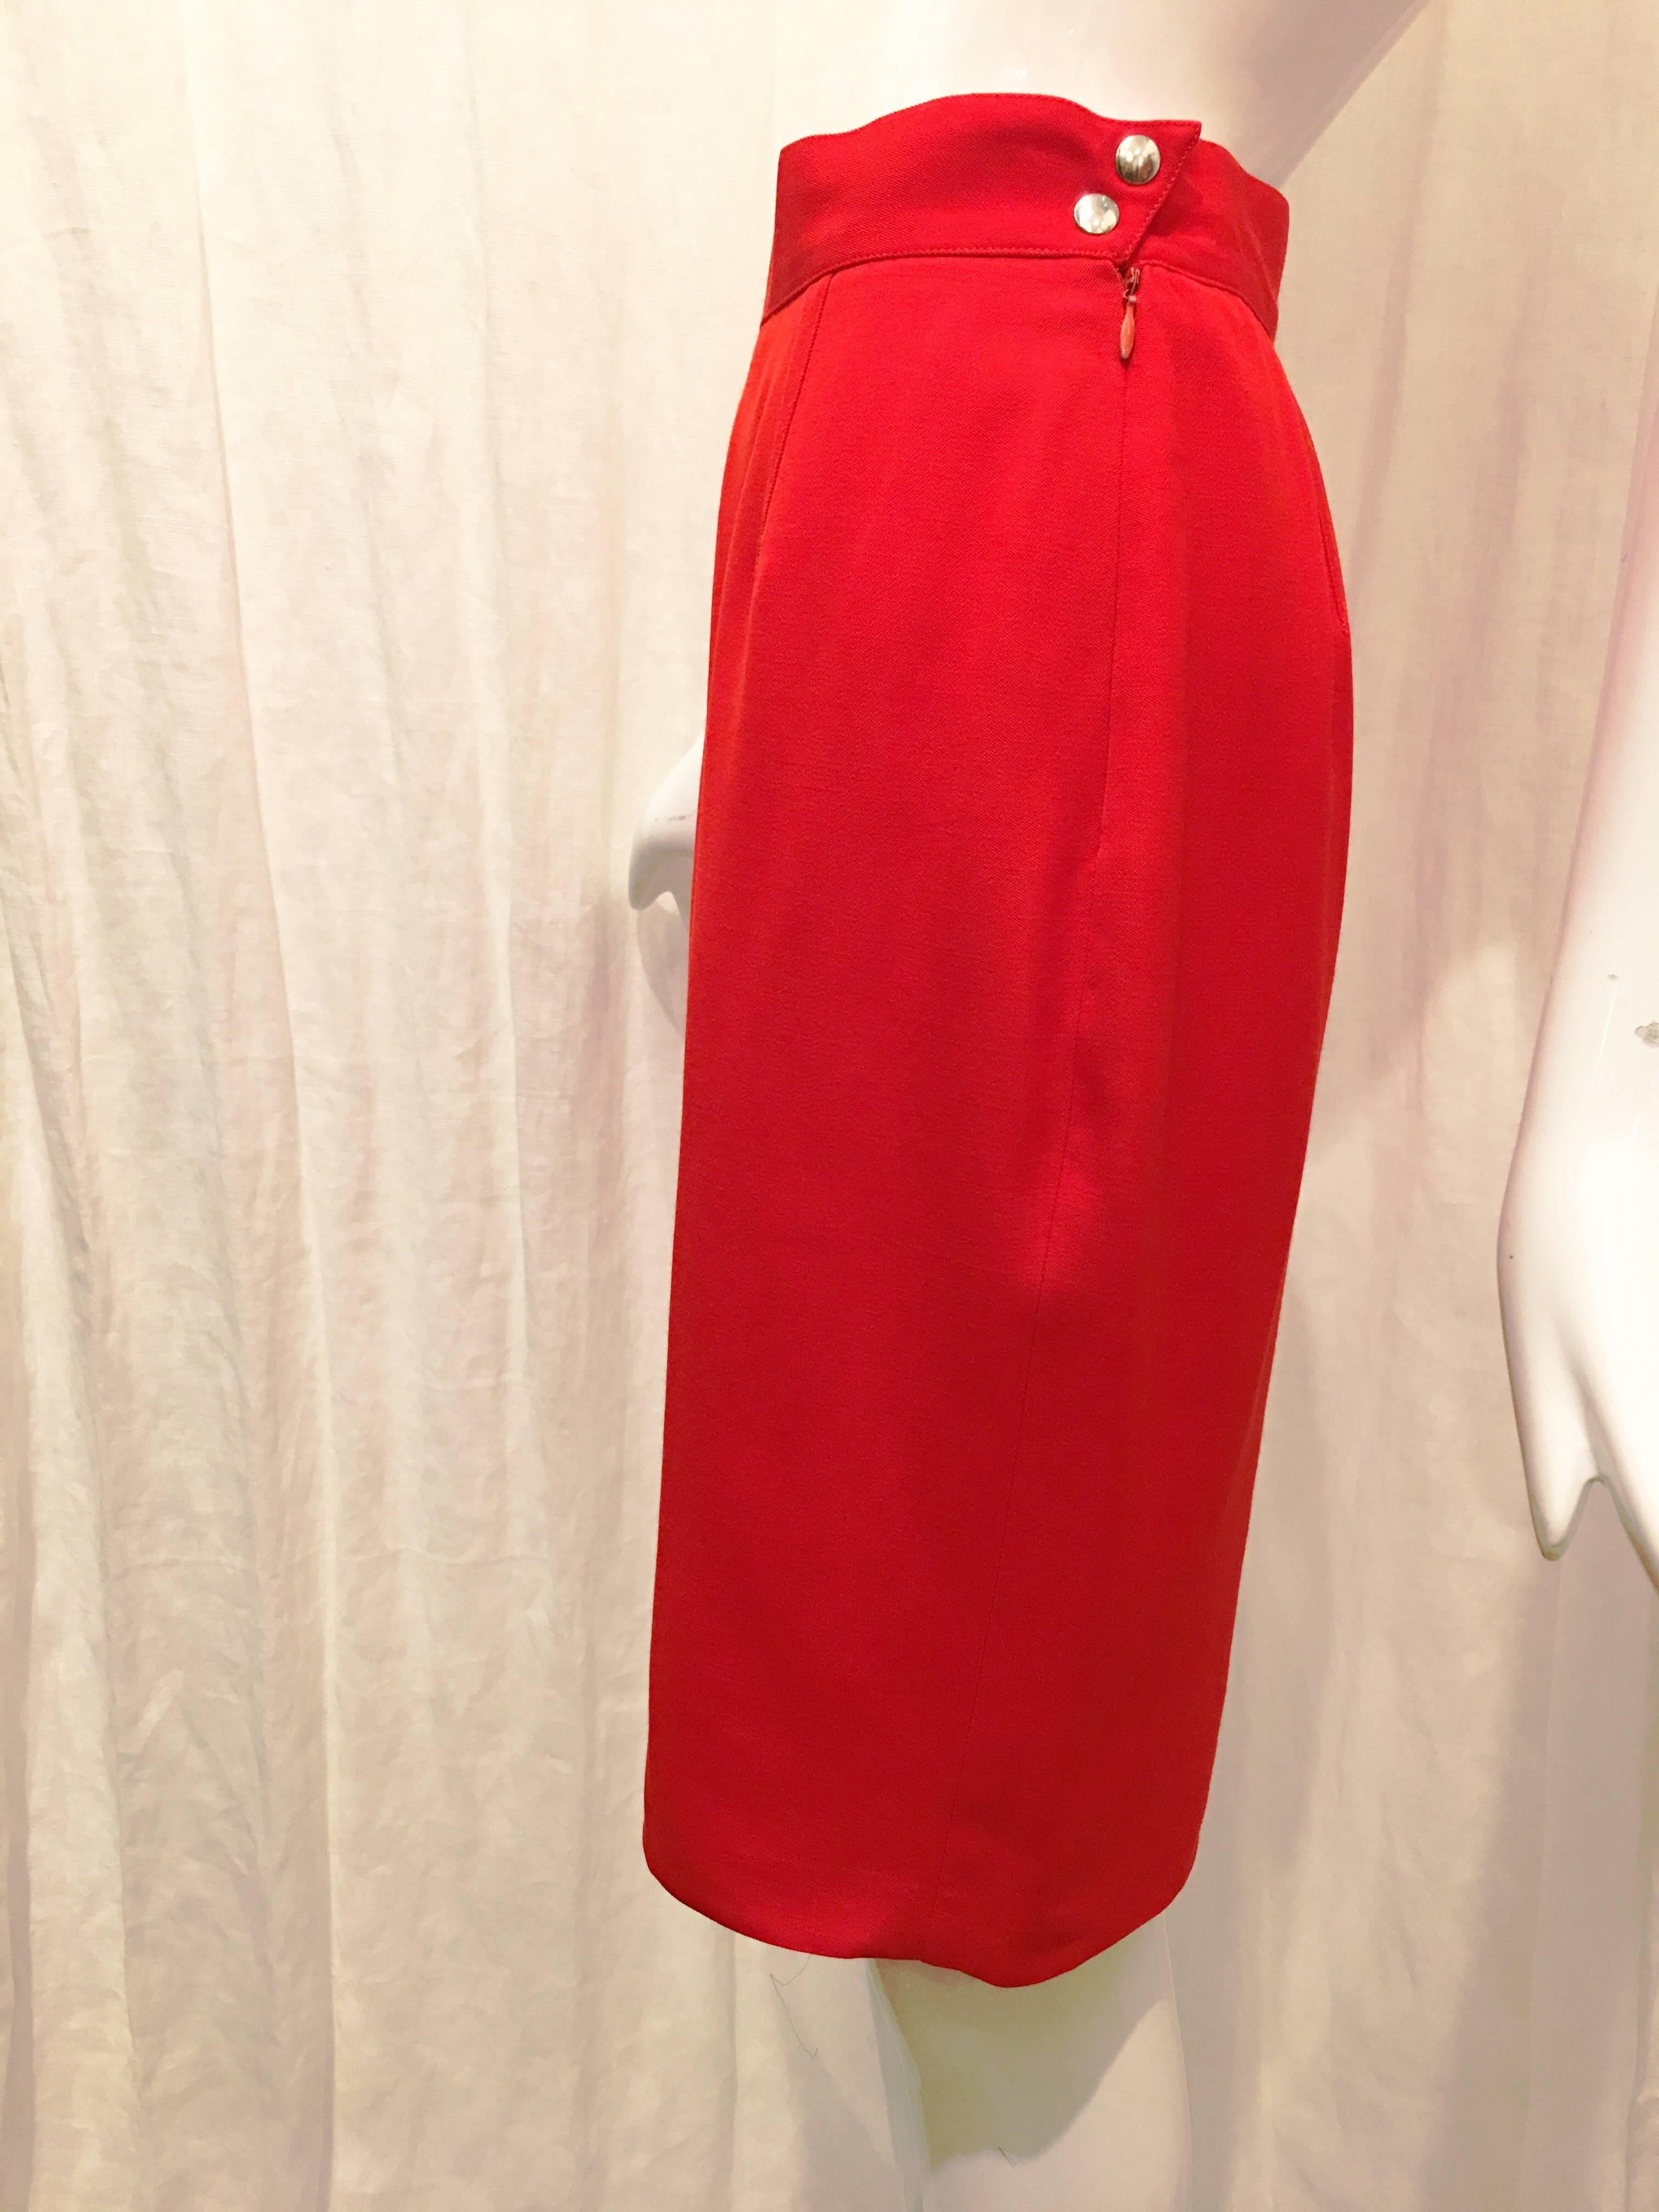 Thierry Mugler red wool pencil skirt. Two snap buttons as well as zipper at left side of garment. Sharp pointed edge at buttons adds a subtle hint of edginess to an otherwise very simple garment. Hits at the knee. Fully lined. 
A simple staple skirt